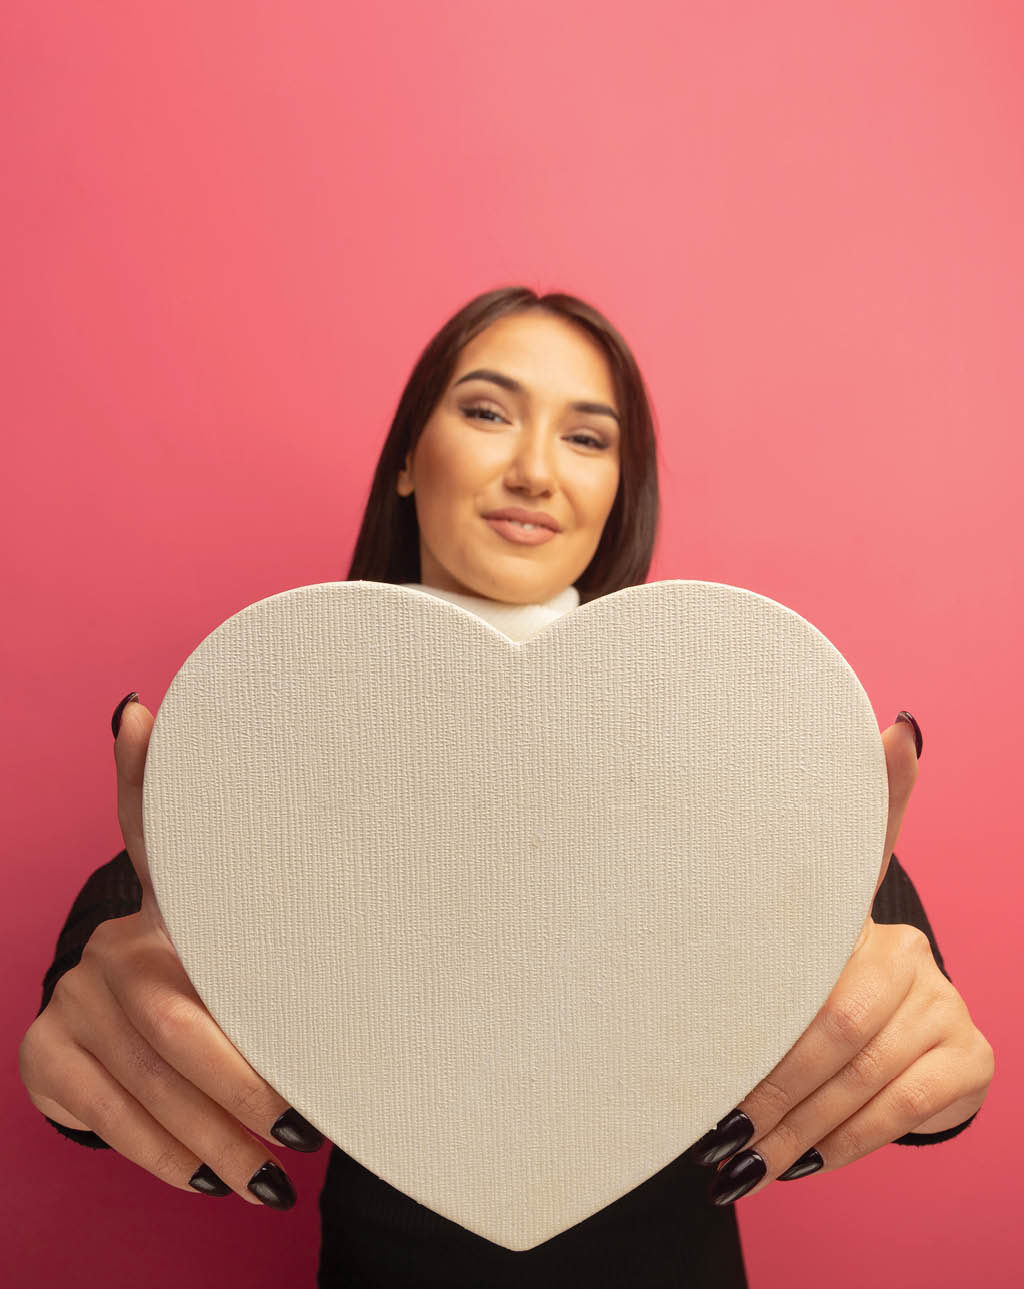 young woman with white scarf showing cardboard heart looking at camera smiling cherfully standing over pink background